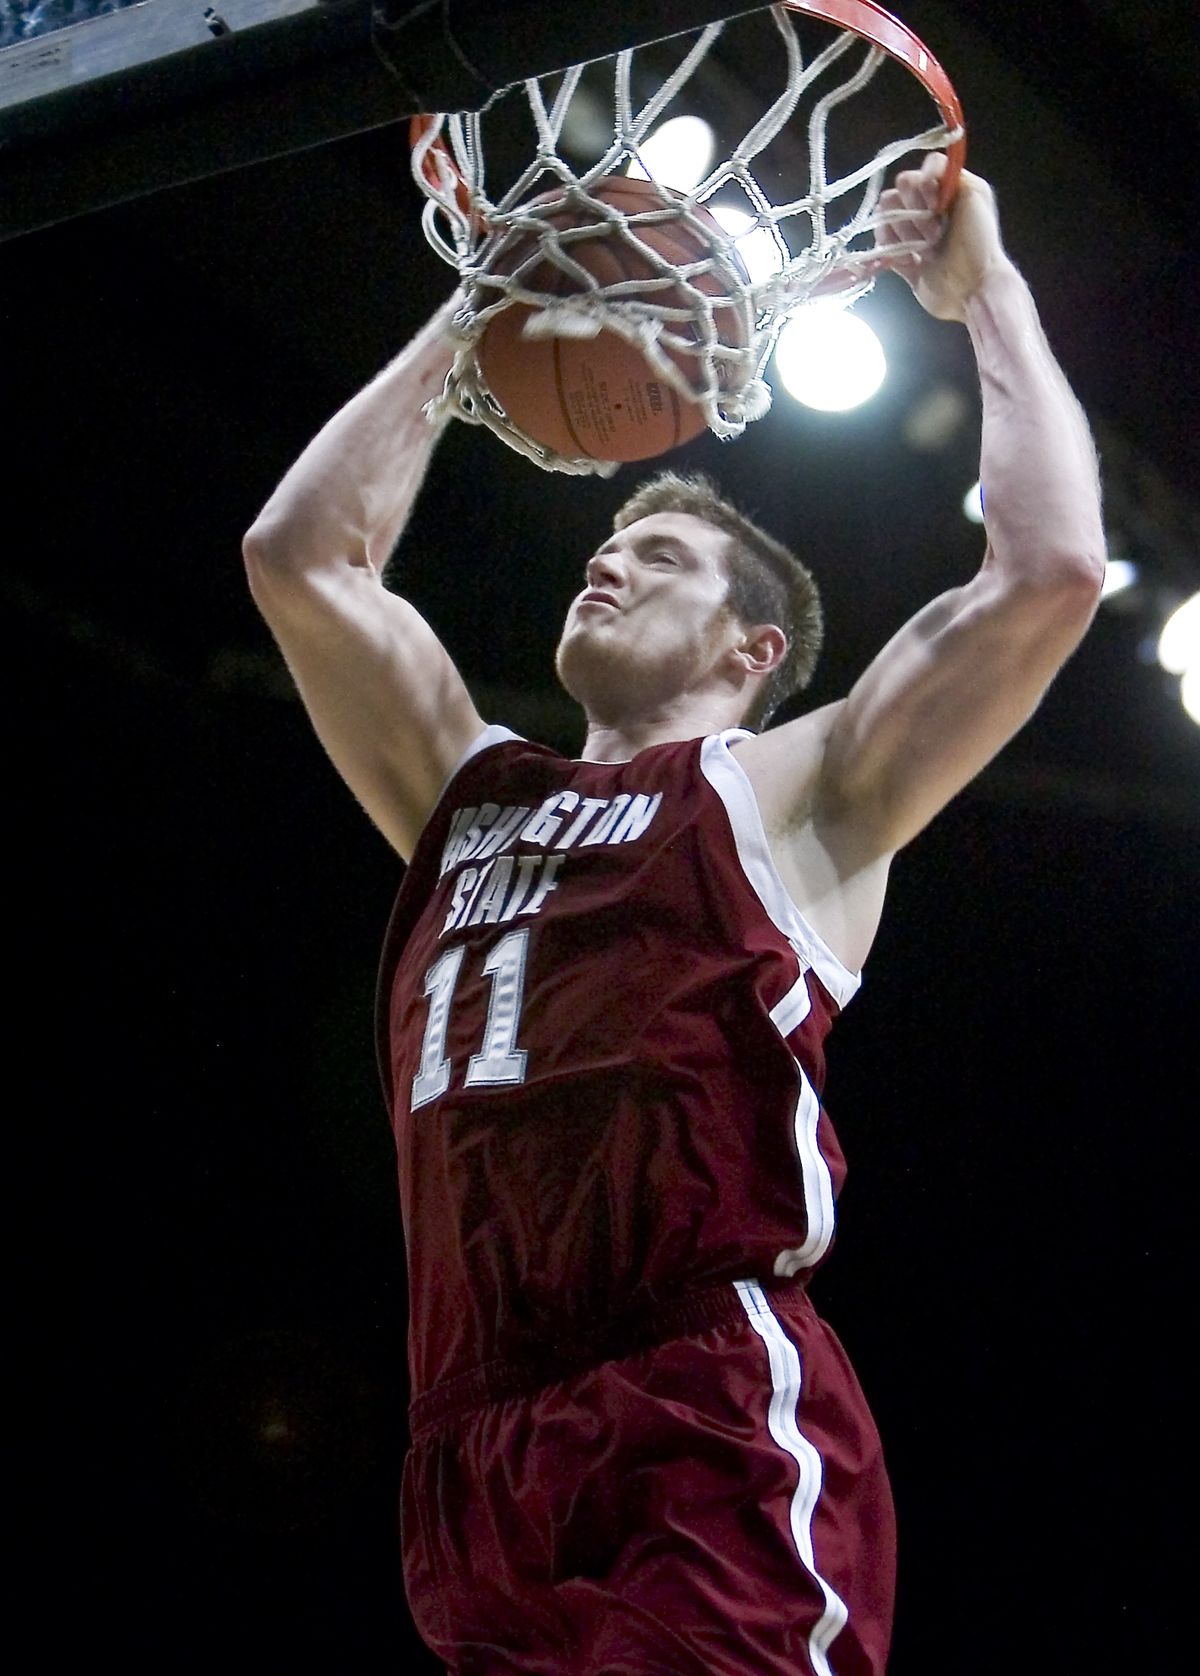 WSU’s Aron Baynes delivers two points late in second half. (Associated Press / The Spokesman-Review)